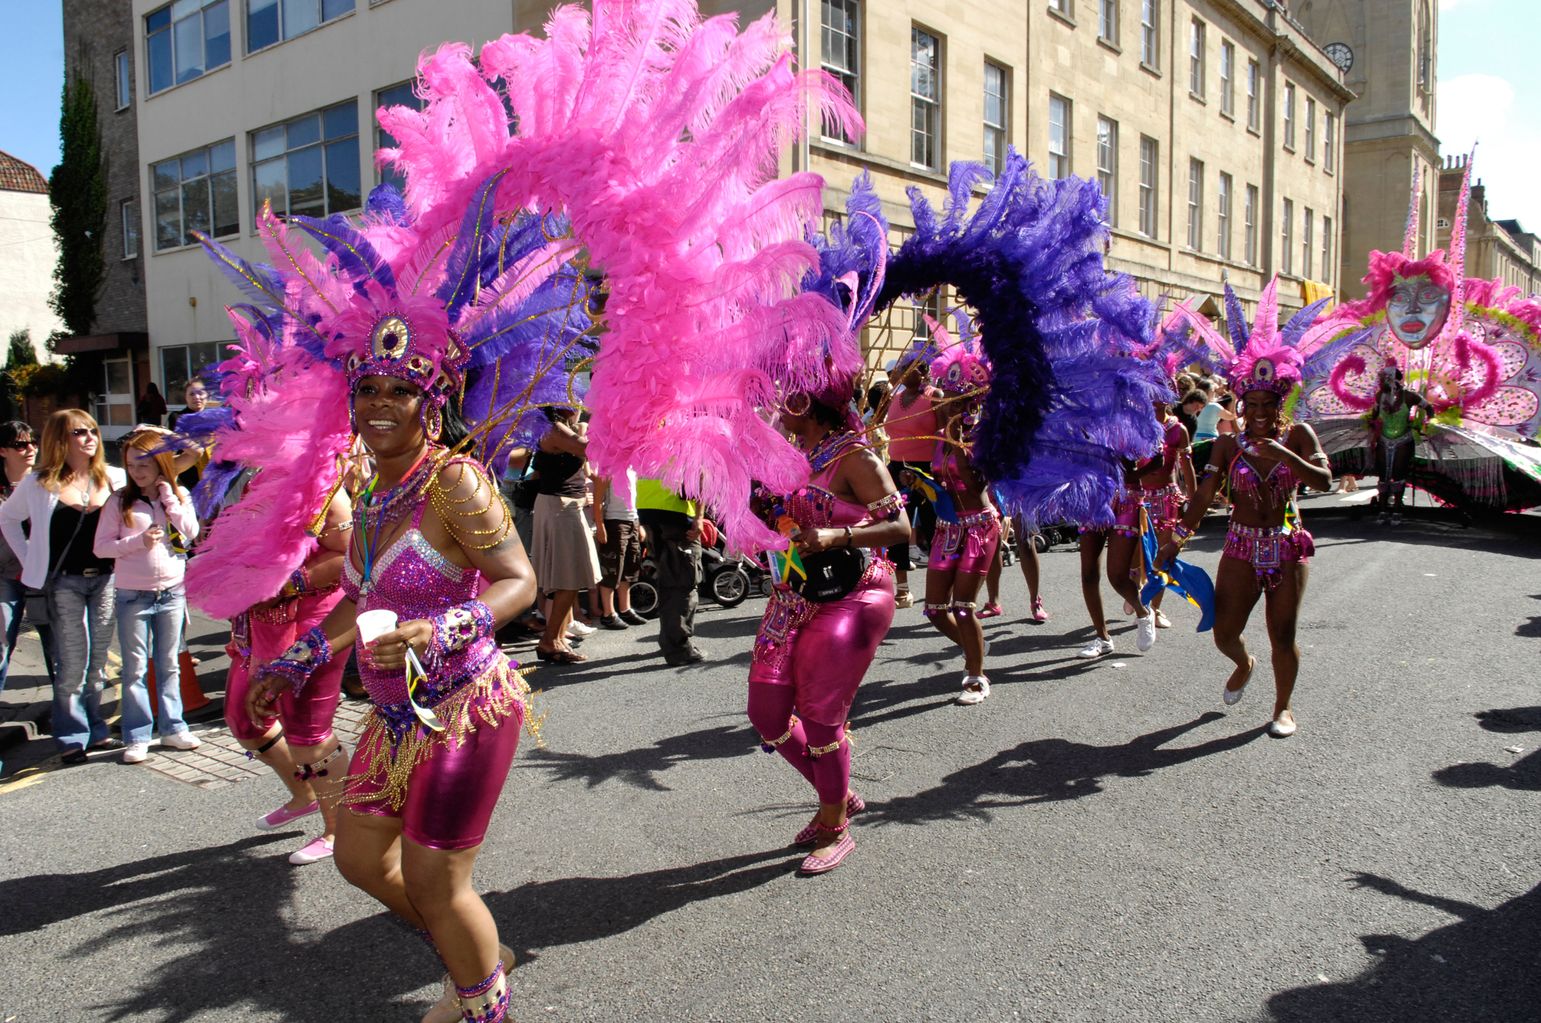 St Pauls carnival, one of the city’s mostloved events will return to